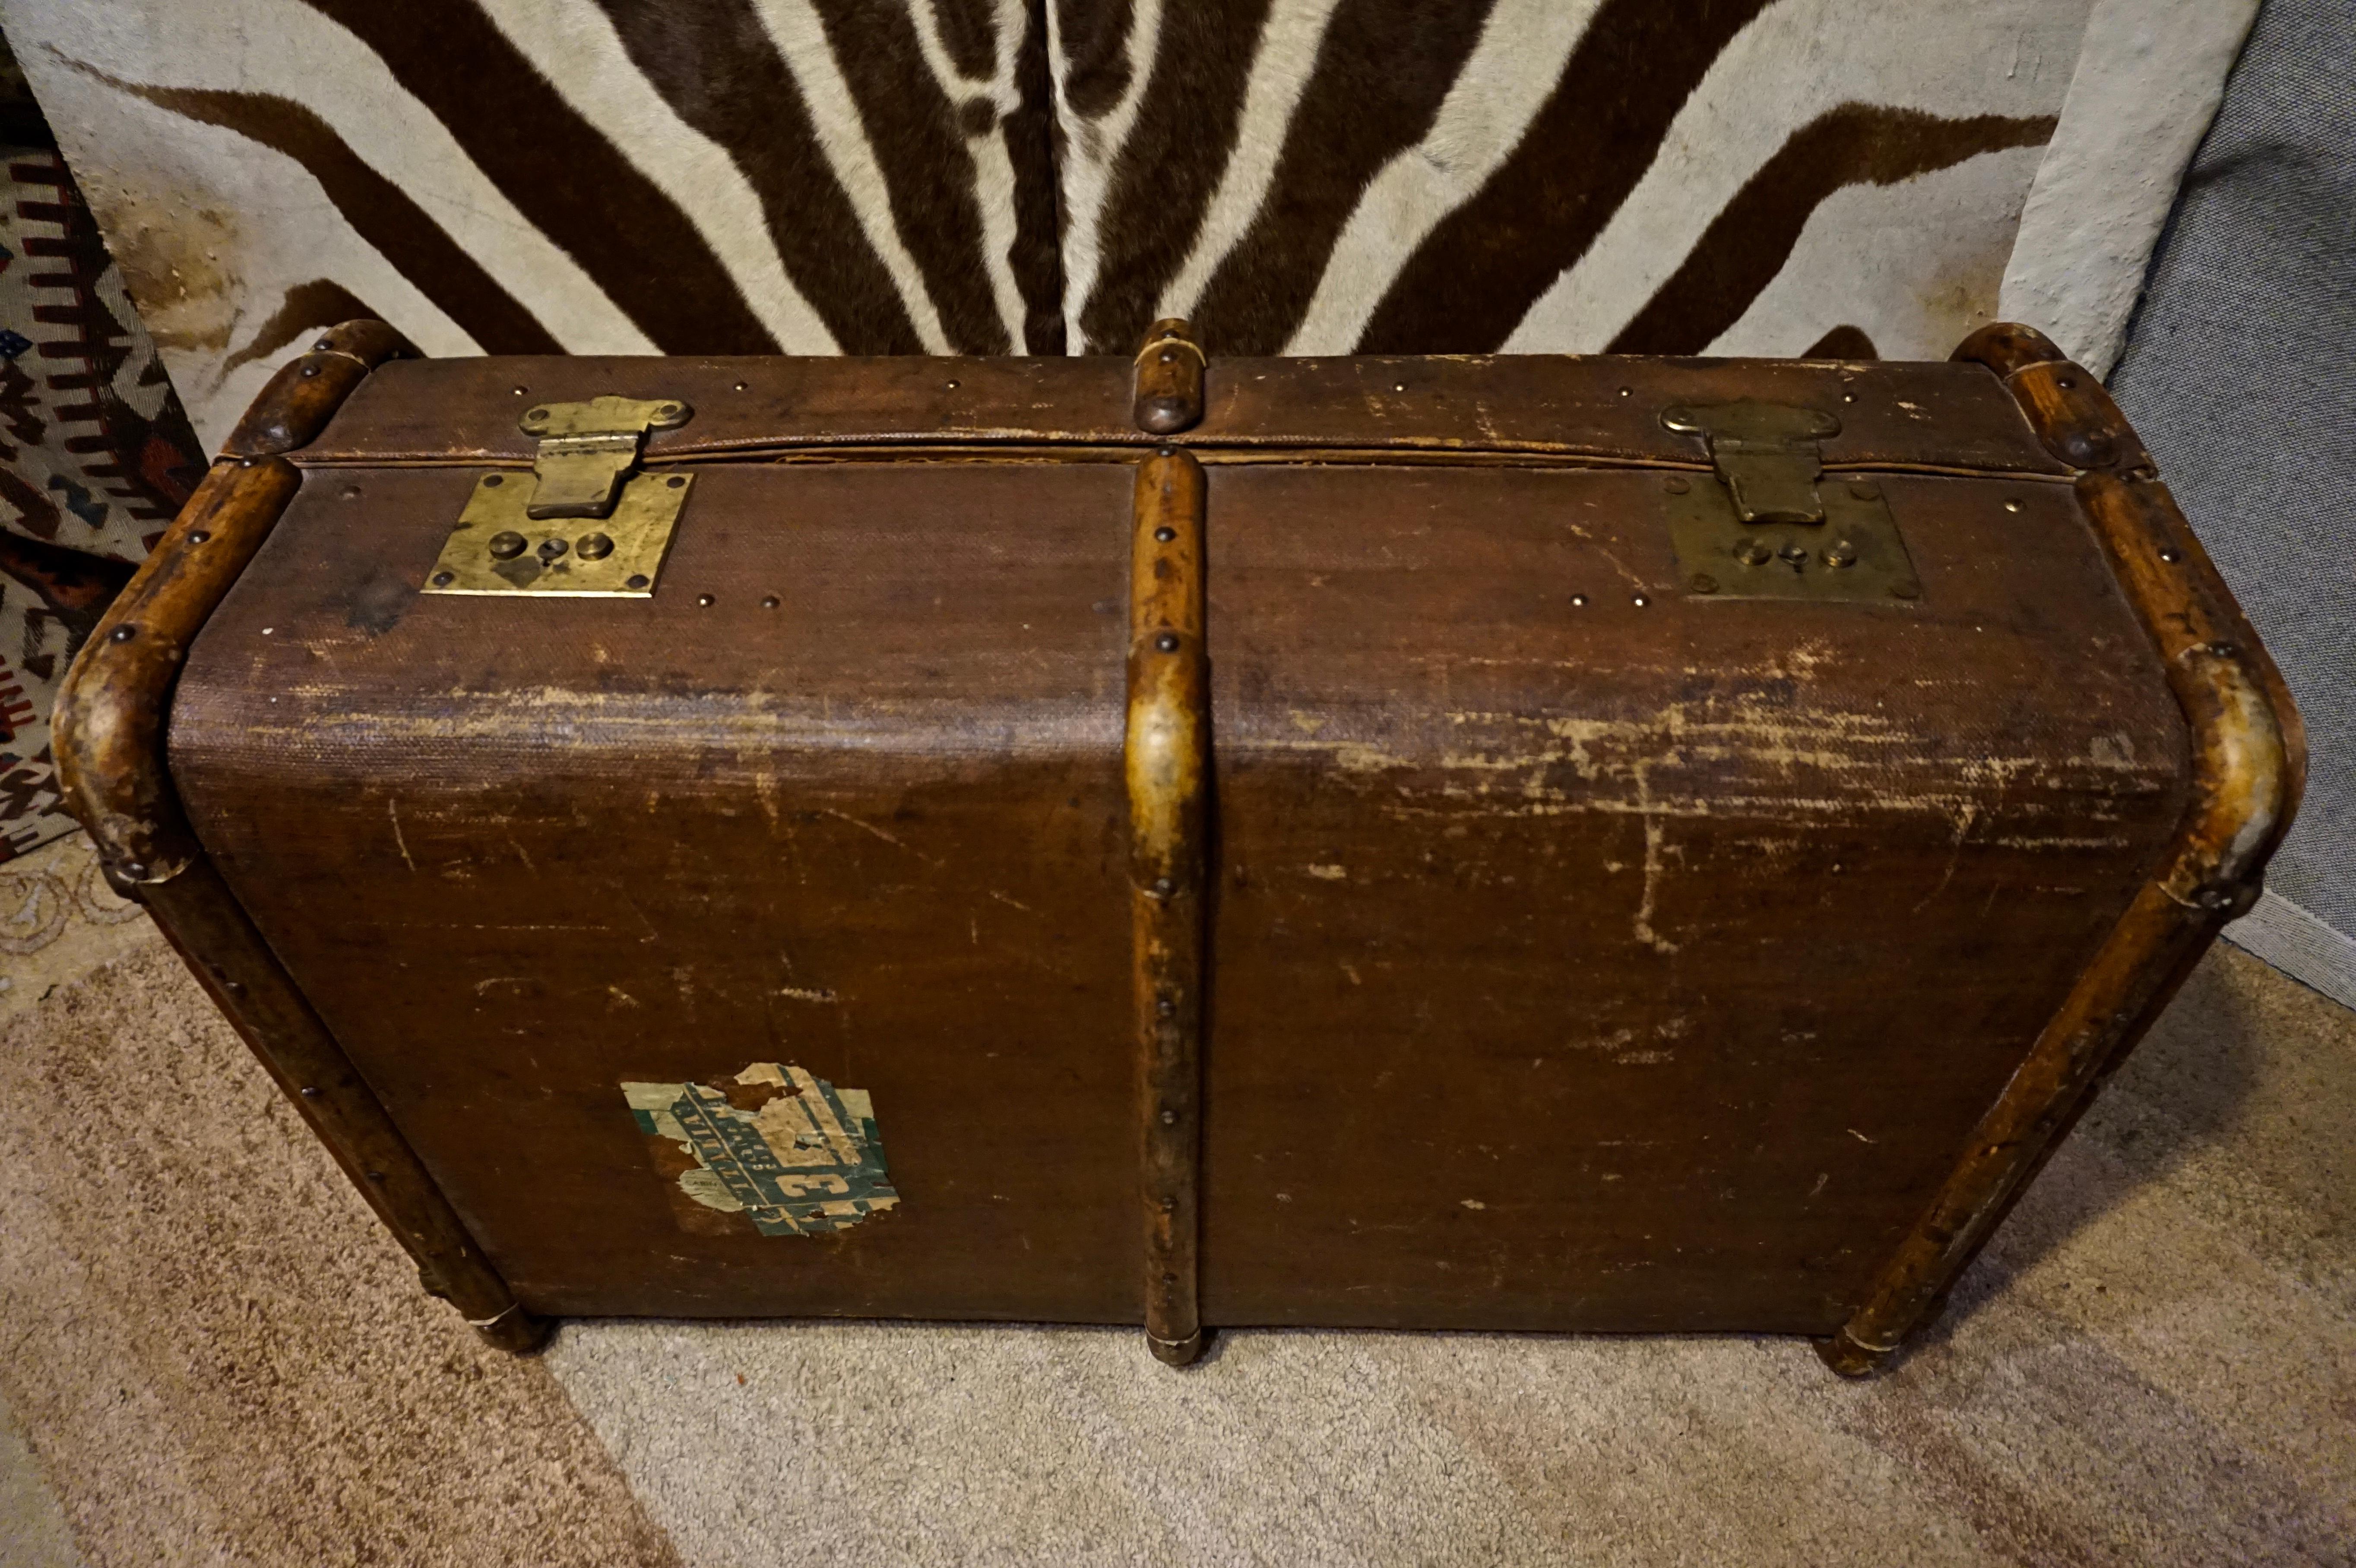 English steamer trunk which exudes old world charm and historic originality down to unrestored canvas, interior, travel stickers, leather work and wood trim, brass hardware and key. 